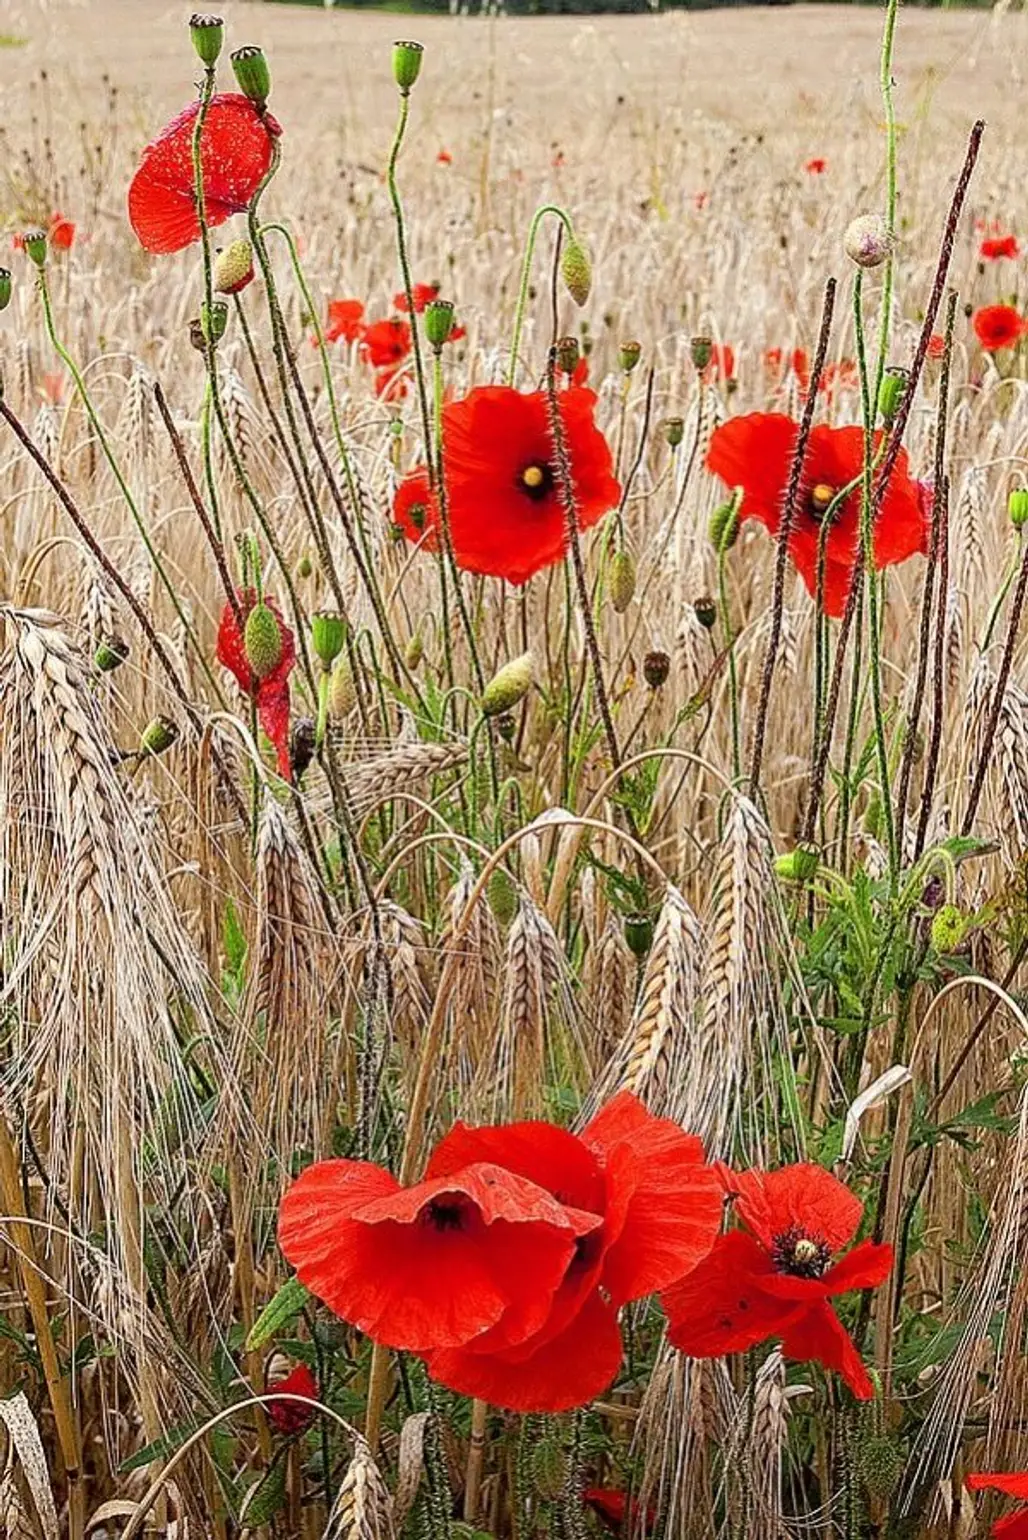 Wild Poppies in the Wheat Field